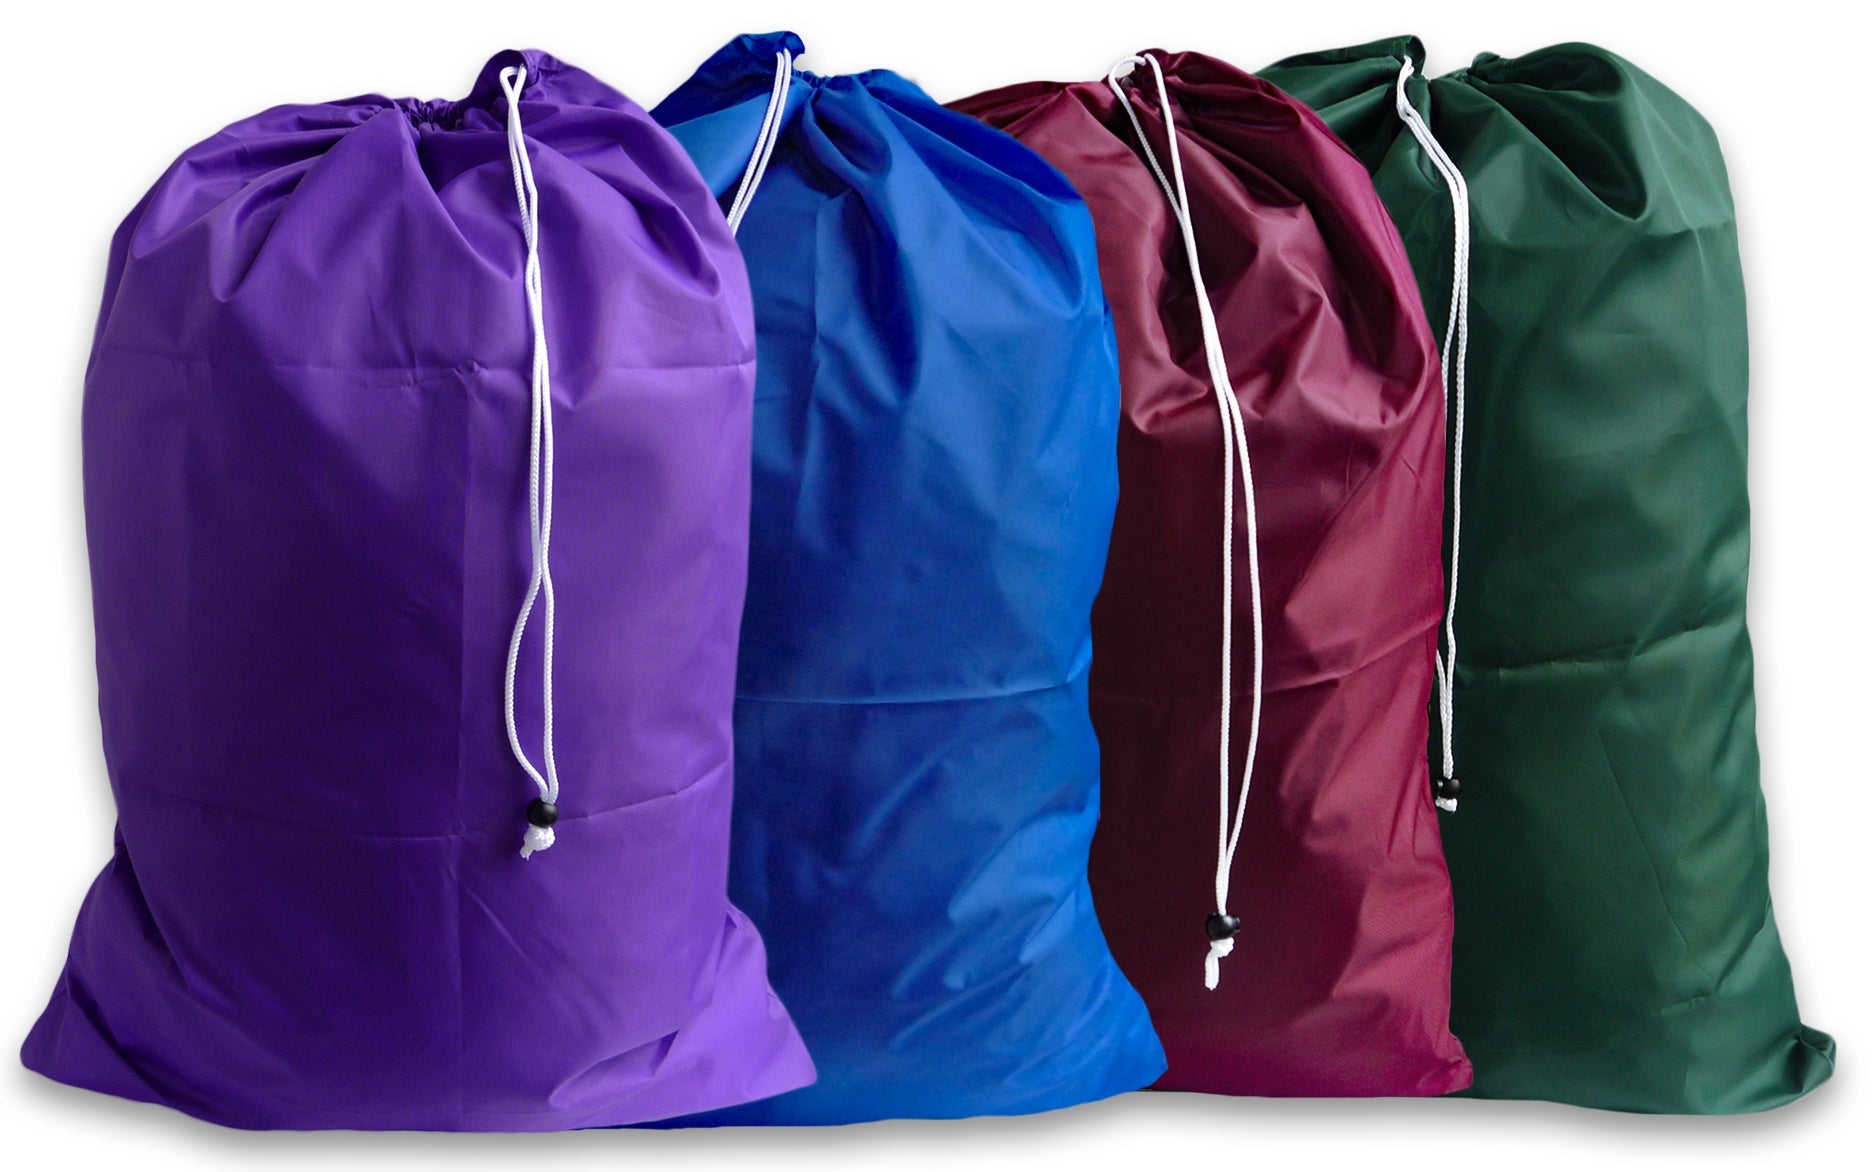 Large 30x40 Laundry Bags, Assorted Colors